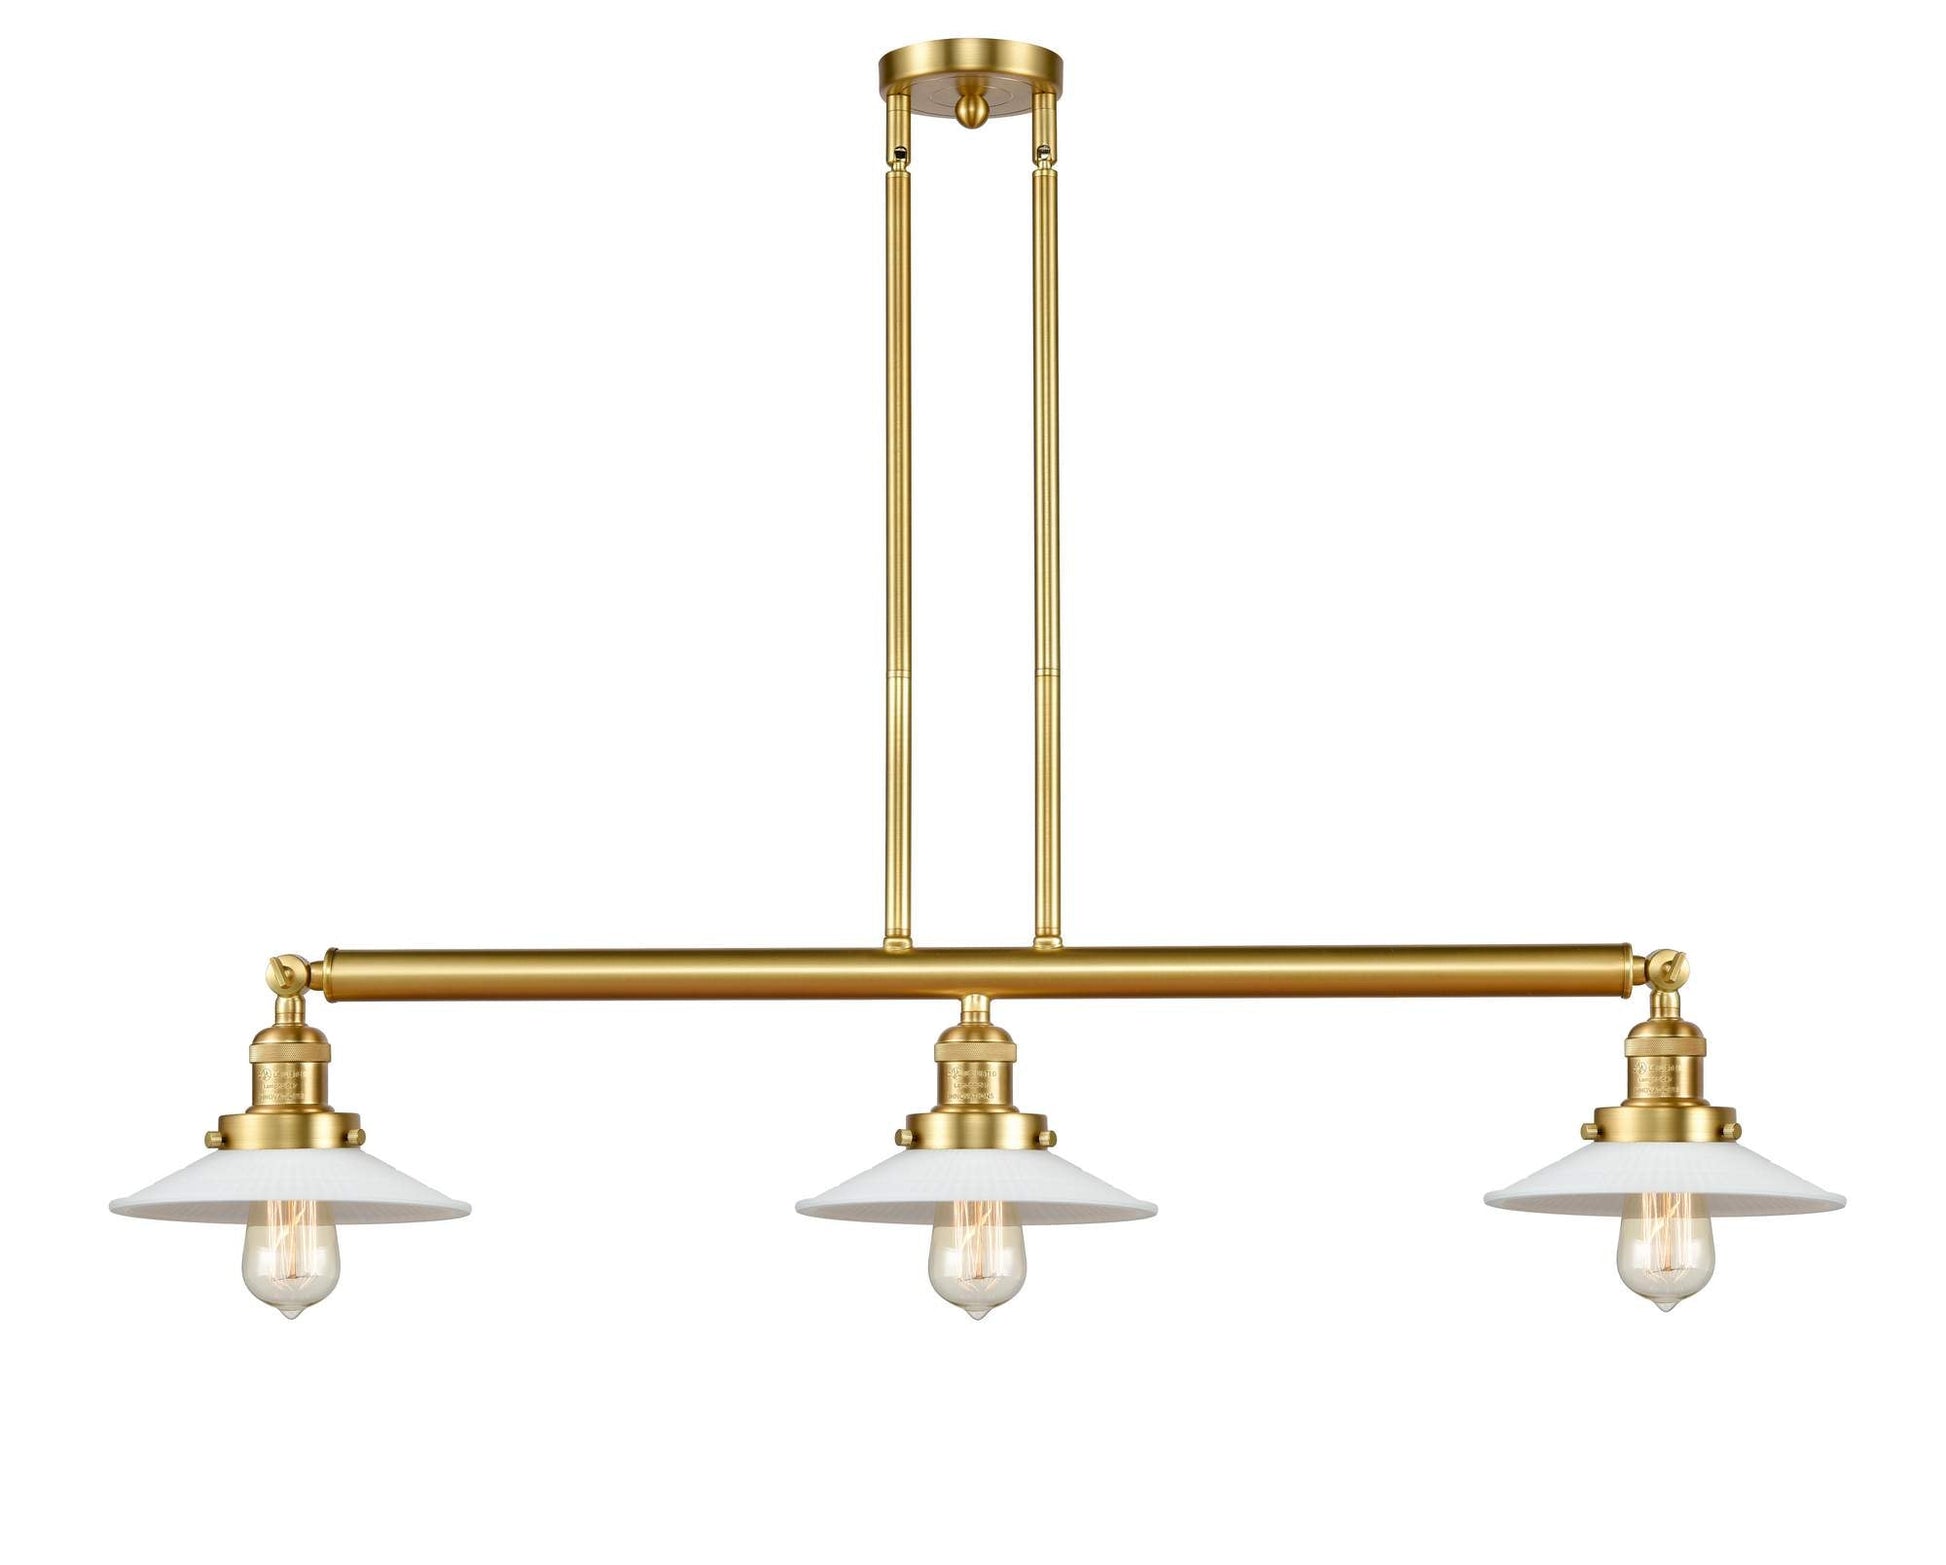 213-SG-G1 3-Light 41" Satin Gold Island Light - White Halophane Glass - LED Bulb - Dimmensions: 41 x 8.5 x 8<br>Minimum Height : 16.25<br>Maximum Height : 40.25 - Sloped Ceiling Compatible: Yes